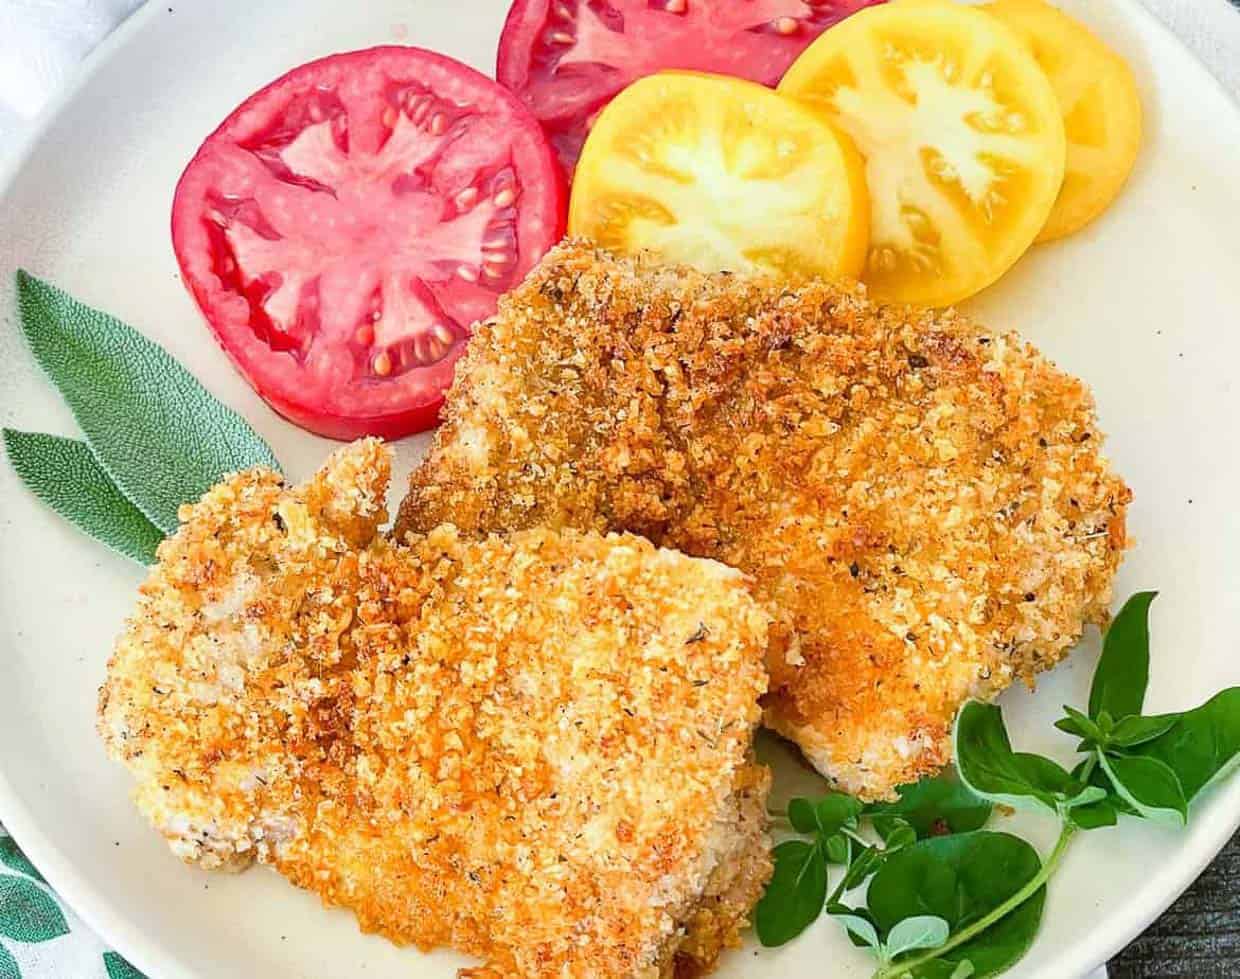 Easy chicken recipes: A plate with fried chicken and tomatoes on it.